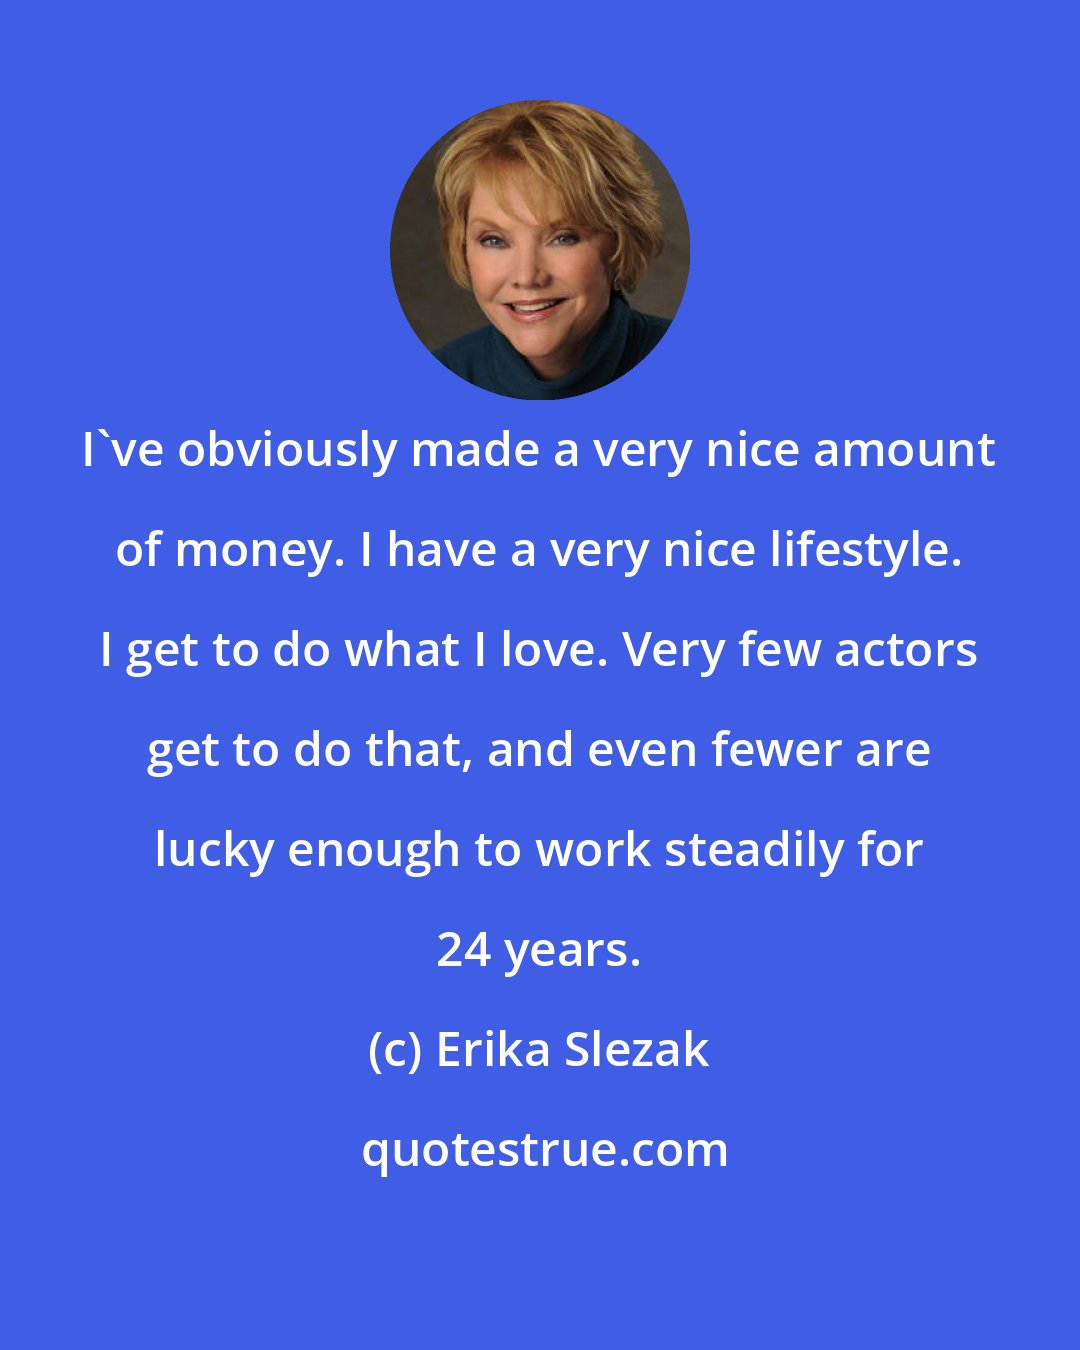 Erika Slezak: I've obviously made a very nice amount of money. I have a very nice lifestyle. I get to do what I love. Very few actors get to do that, and even fewer are lucky enough to work steadily for 24 years.